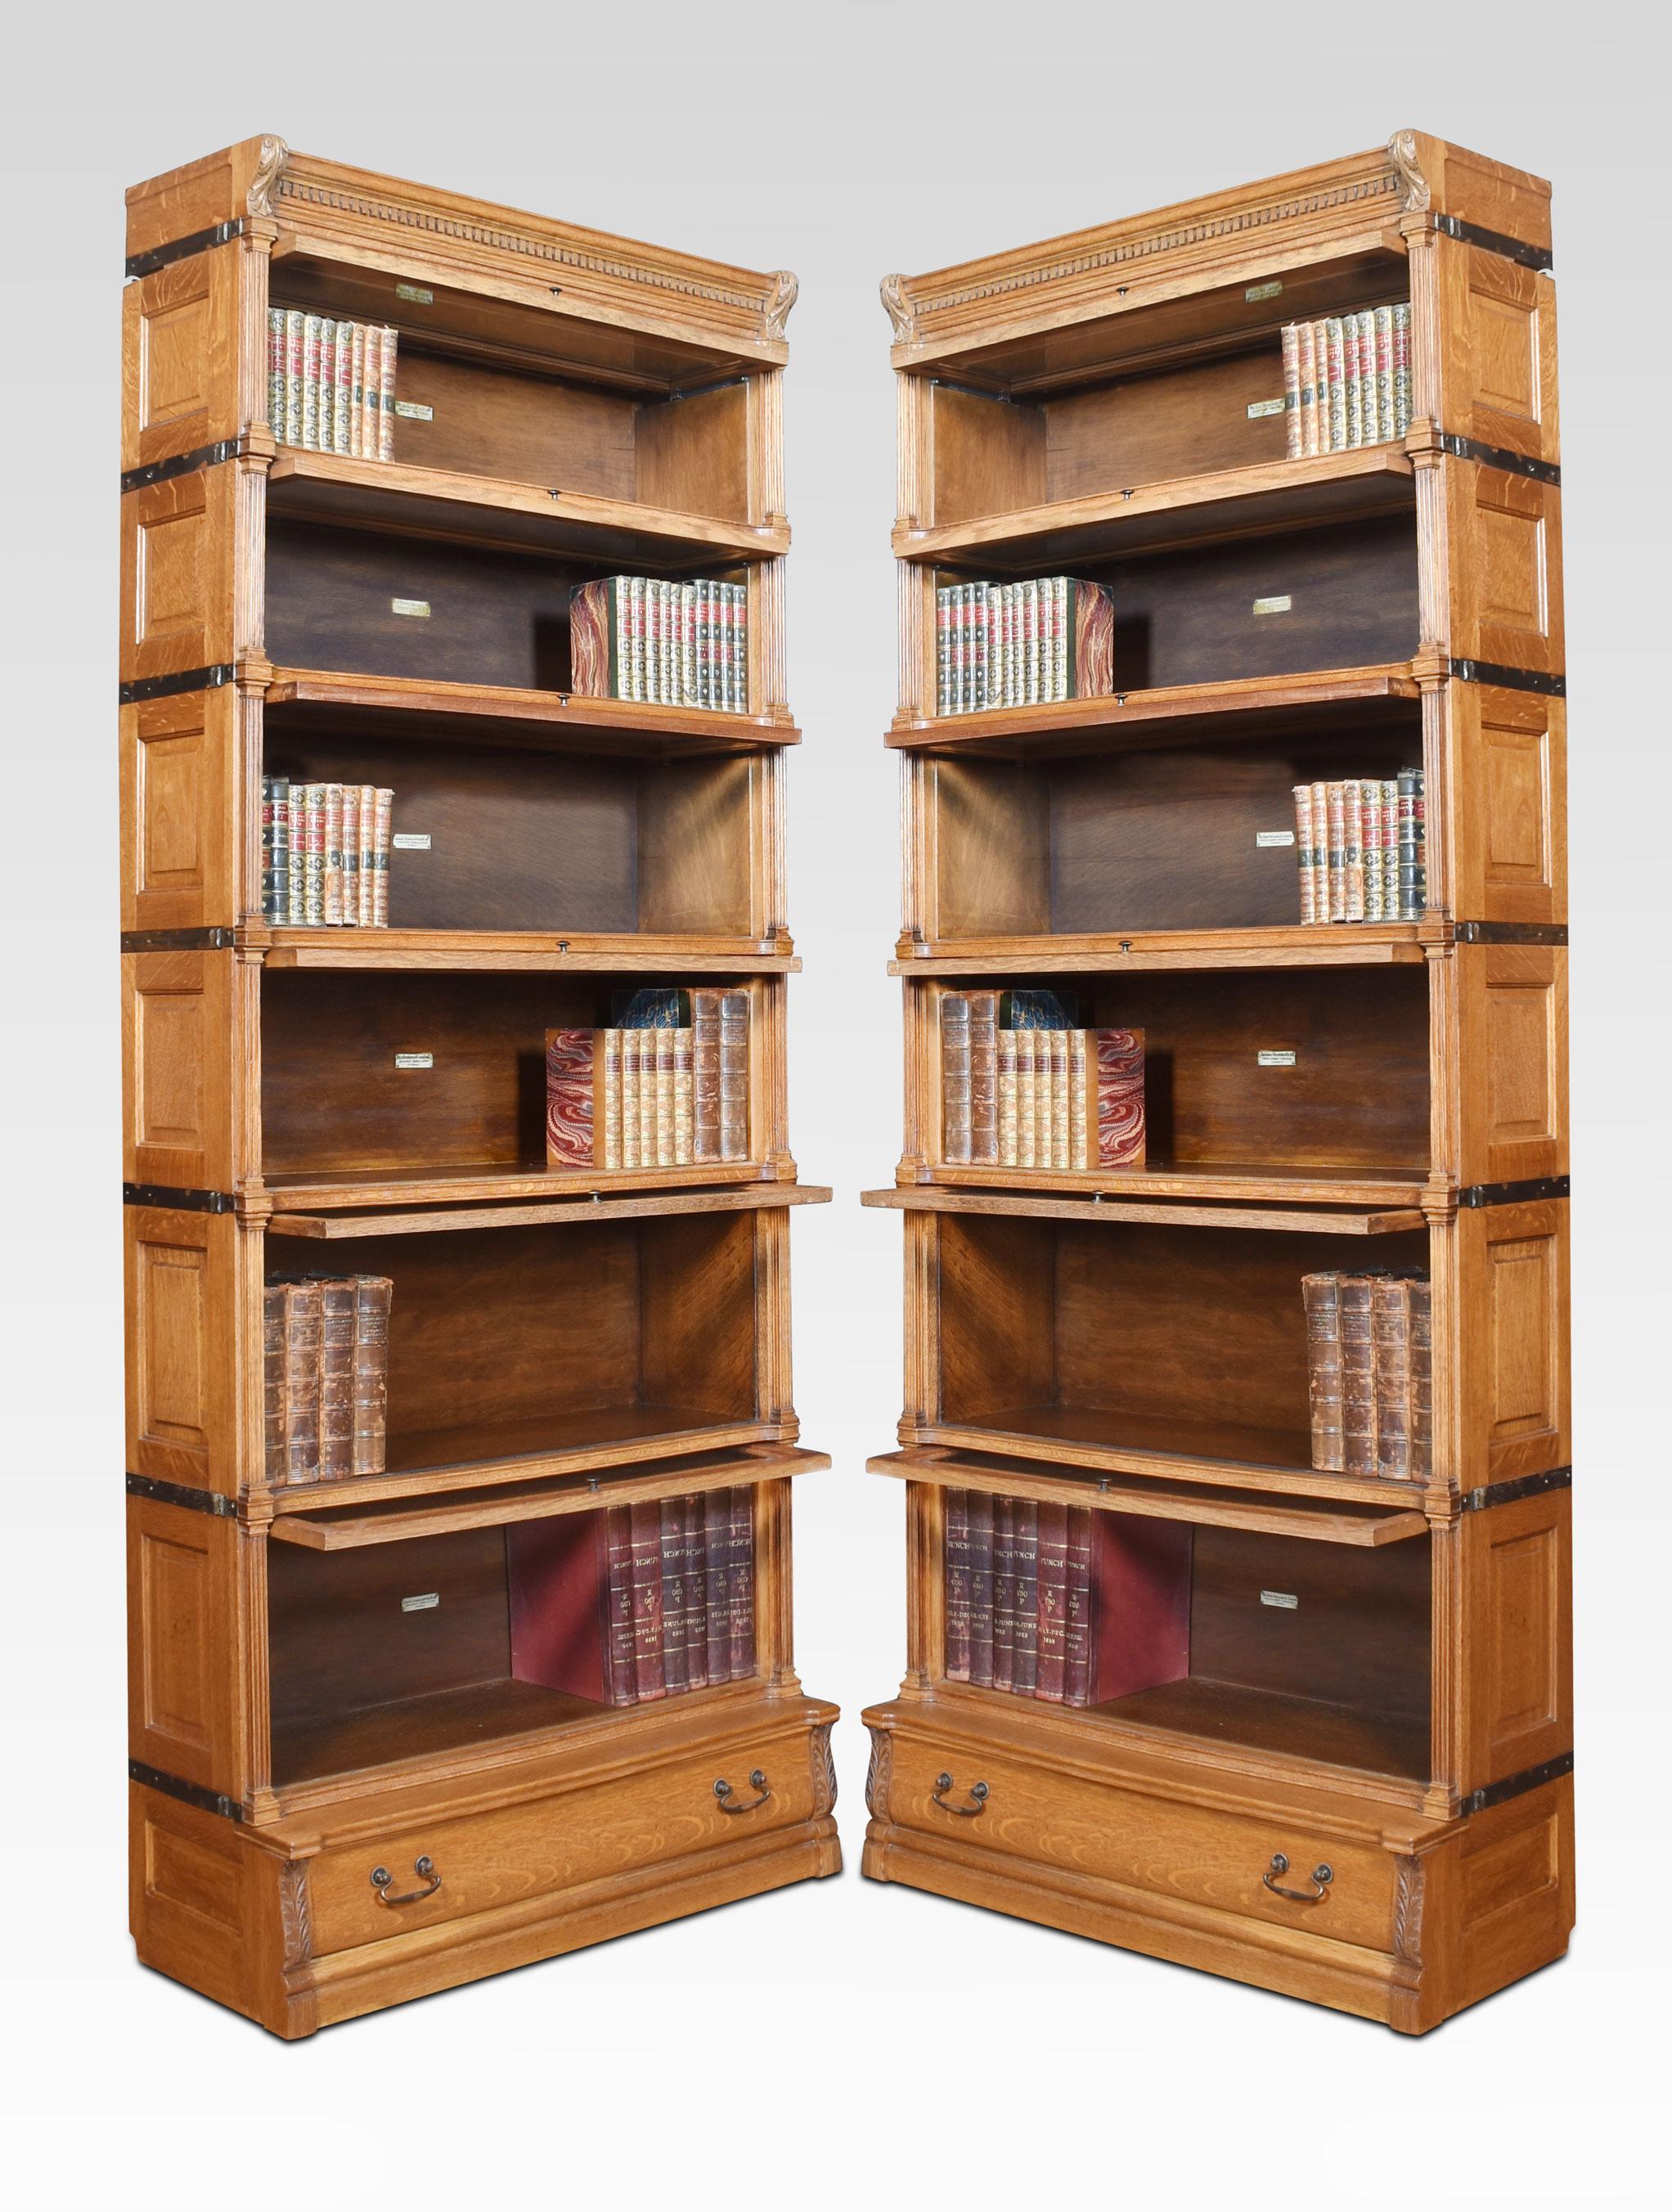 Pair of oak Globe Wernicke sectional bookcases, having six tiers with bevelled glazed doors, between fluted pilasters and having panelled sides, raised on a plinth base with single long drawer.
Dimensions
Height 88 Inches
Width 35.5 Inches
Depth 15